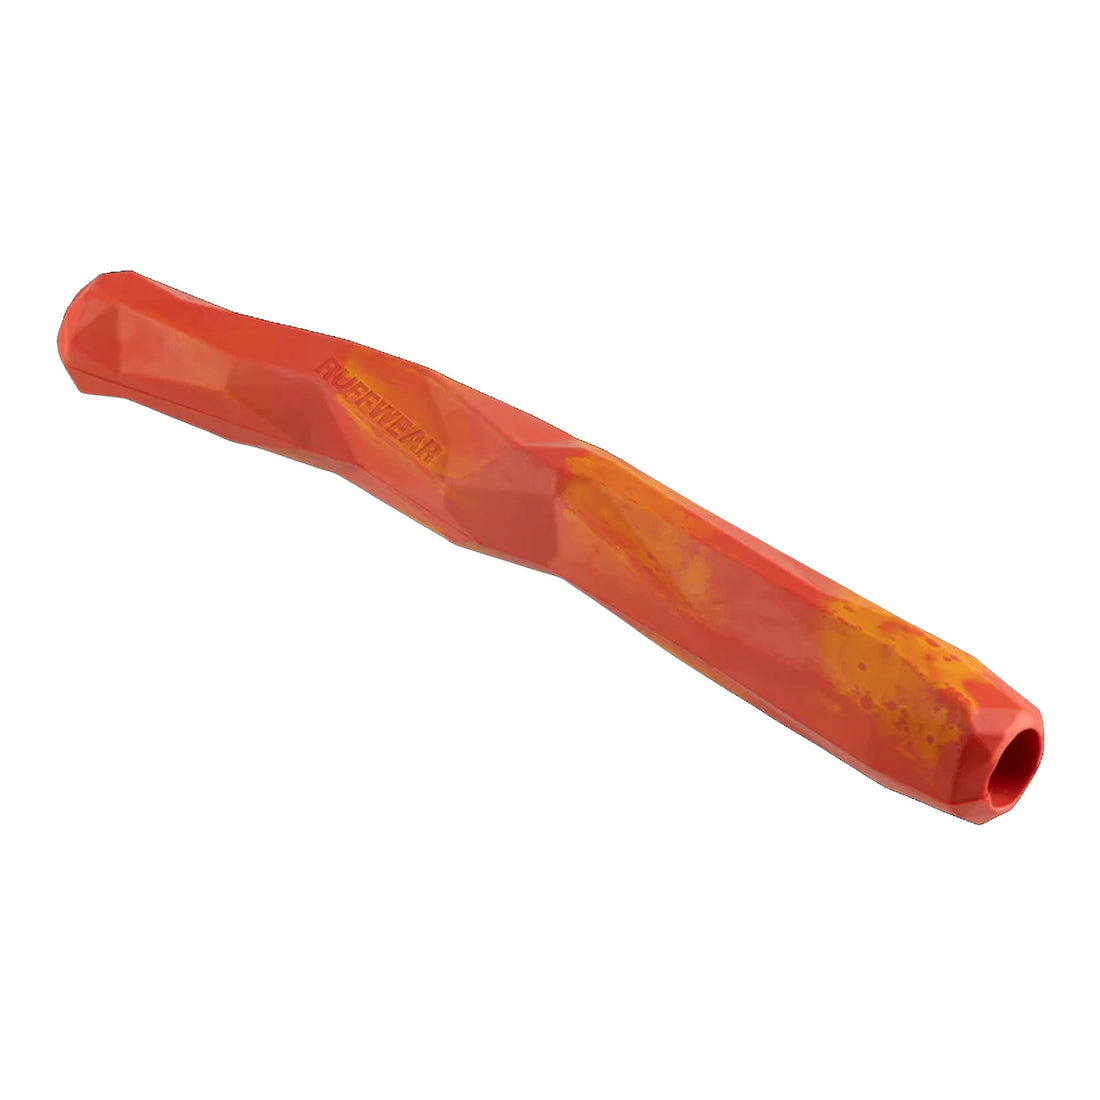 Gnawt-A-Stick Toy - Red Sumac